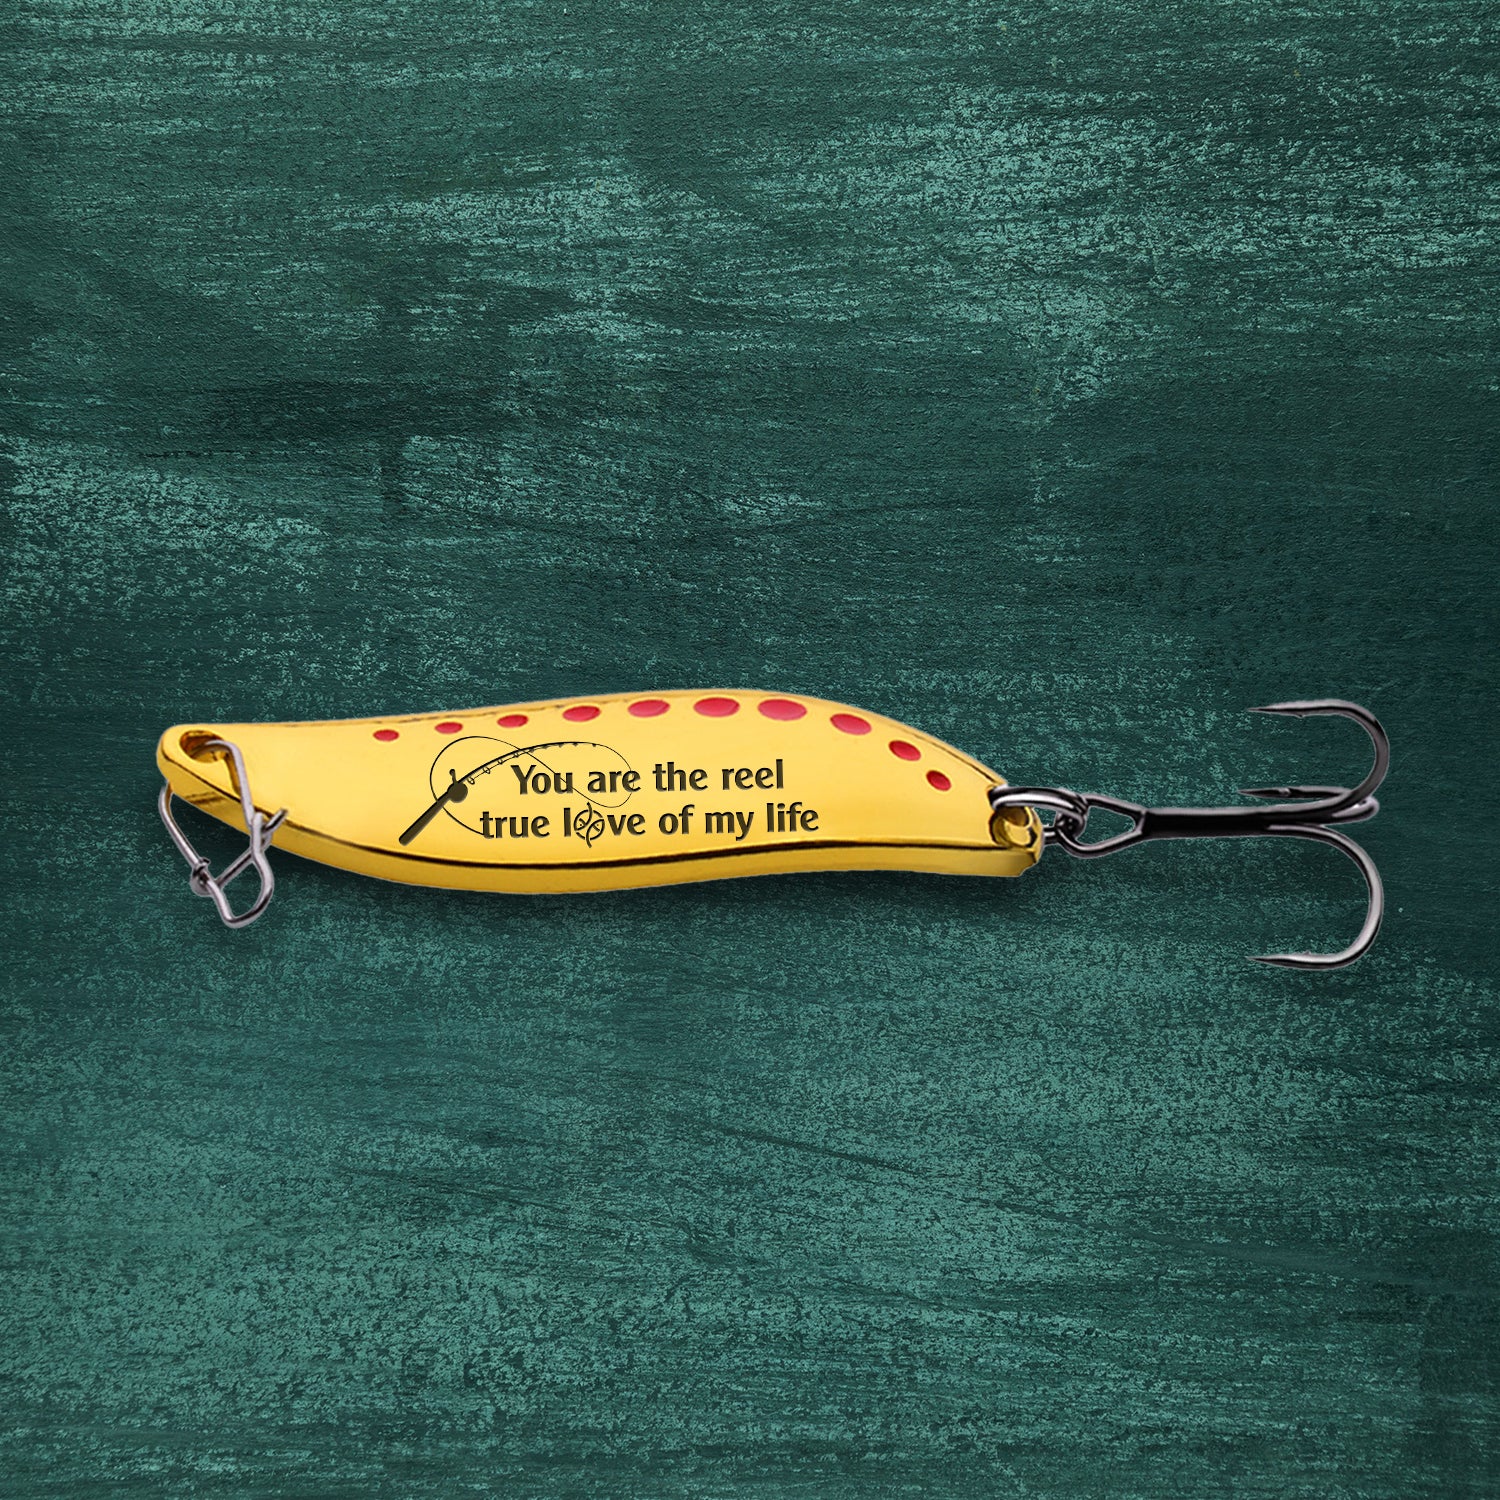 Fishing Spoon Lure - Fishing - To My Master Baiter - I Love You